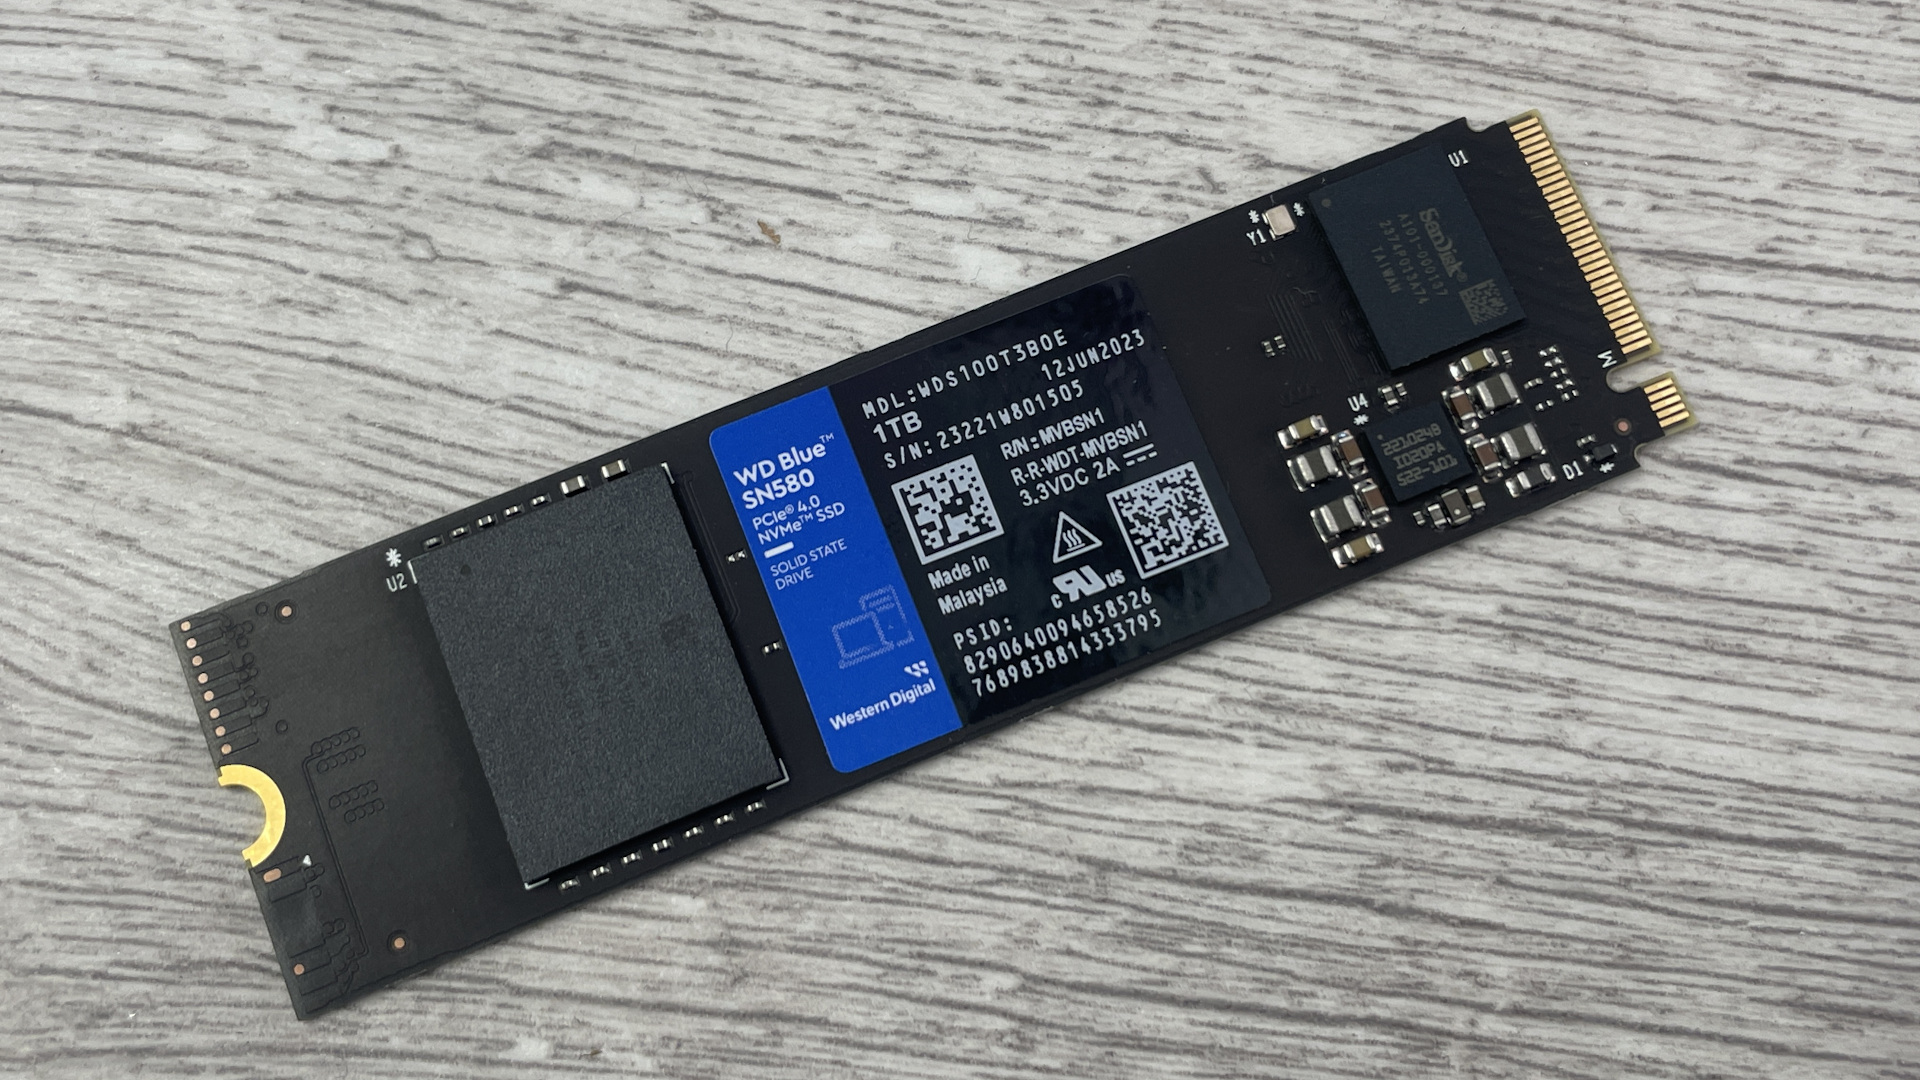 WD Blue SN580 review: a capable budget gaming SSD